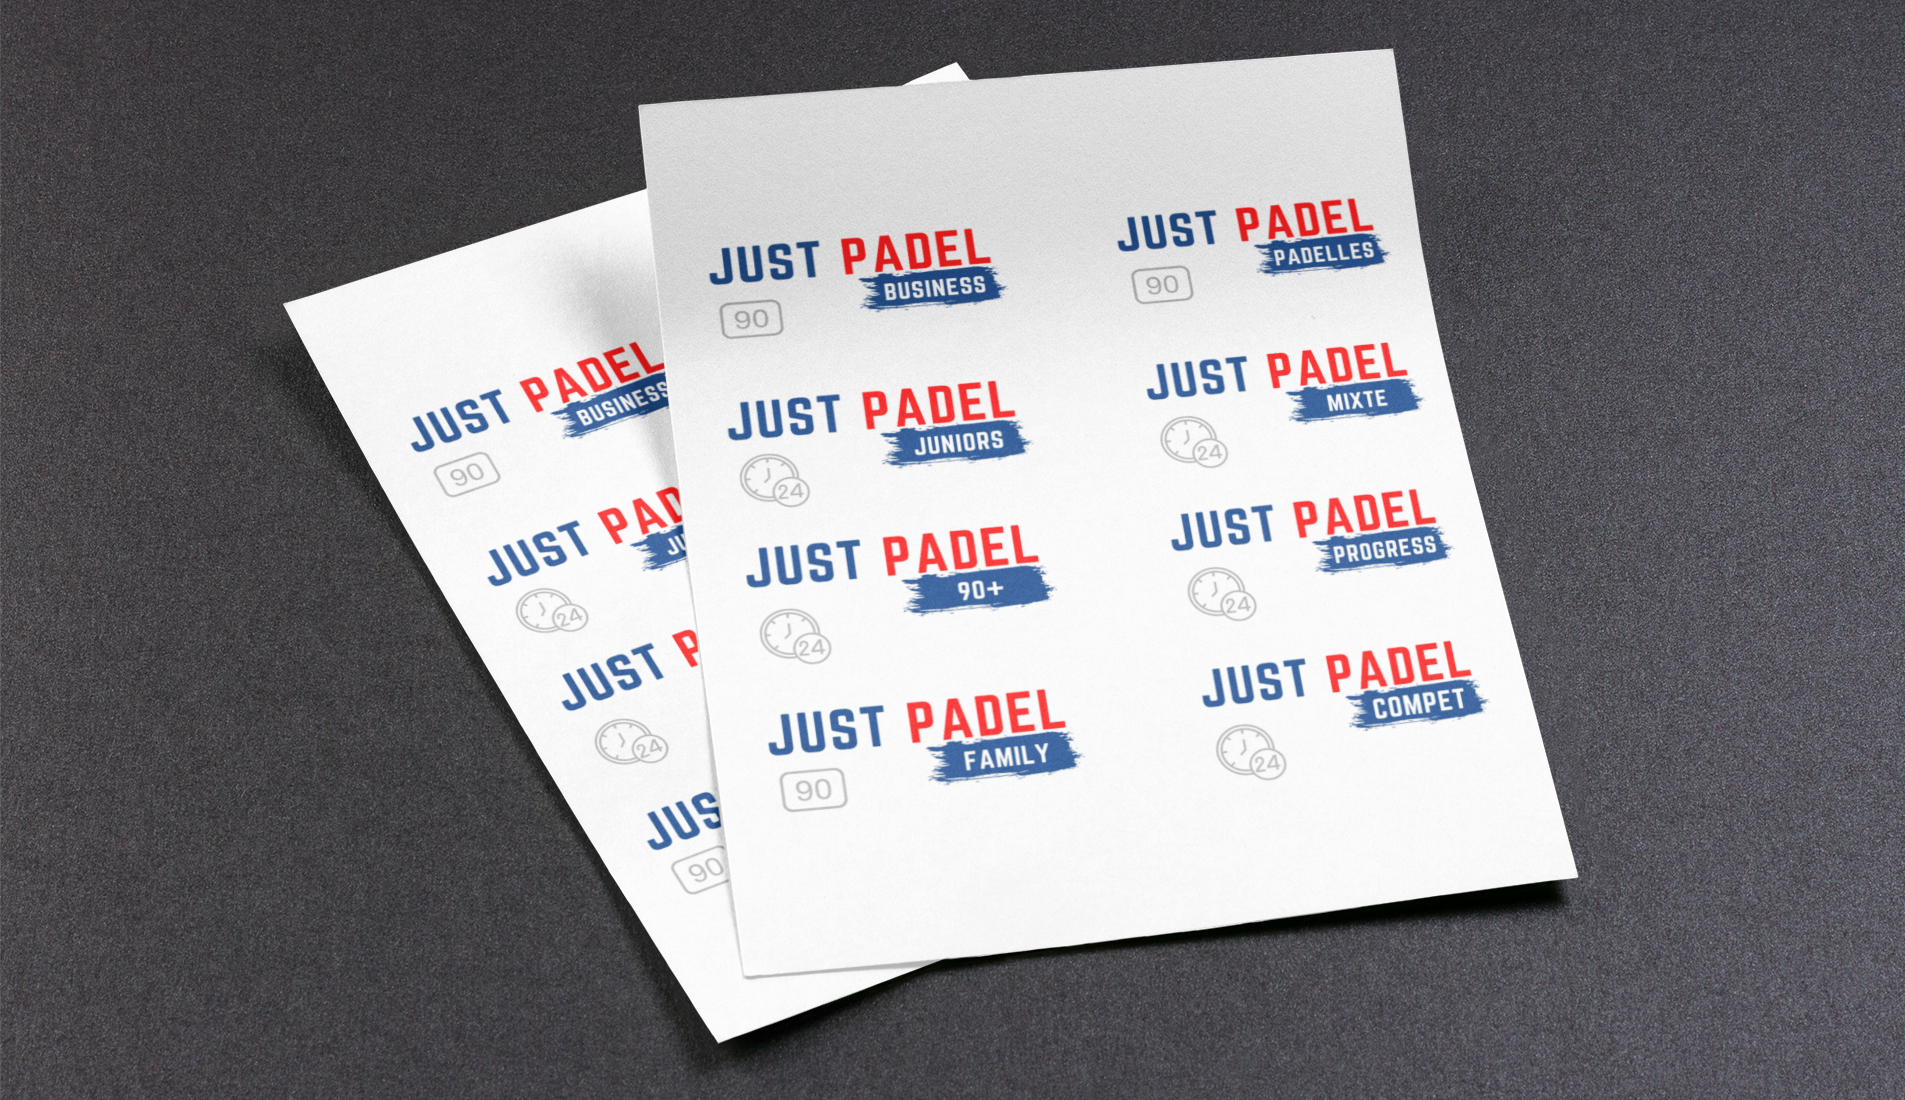 Launch of Just Padel for private clubs!